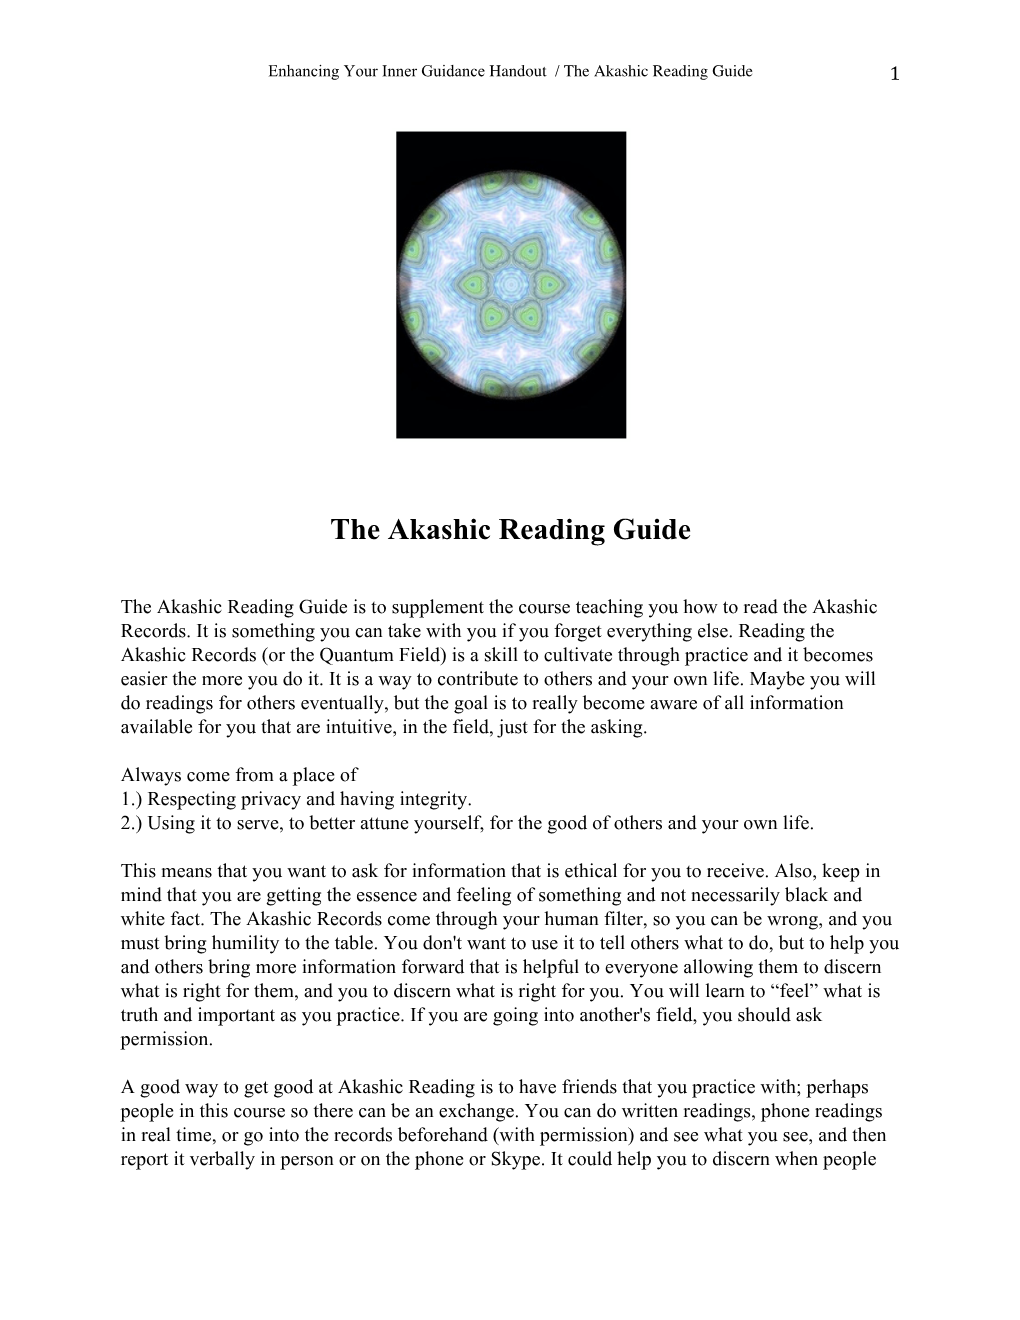 The Akashic Reading Guide 1